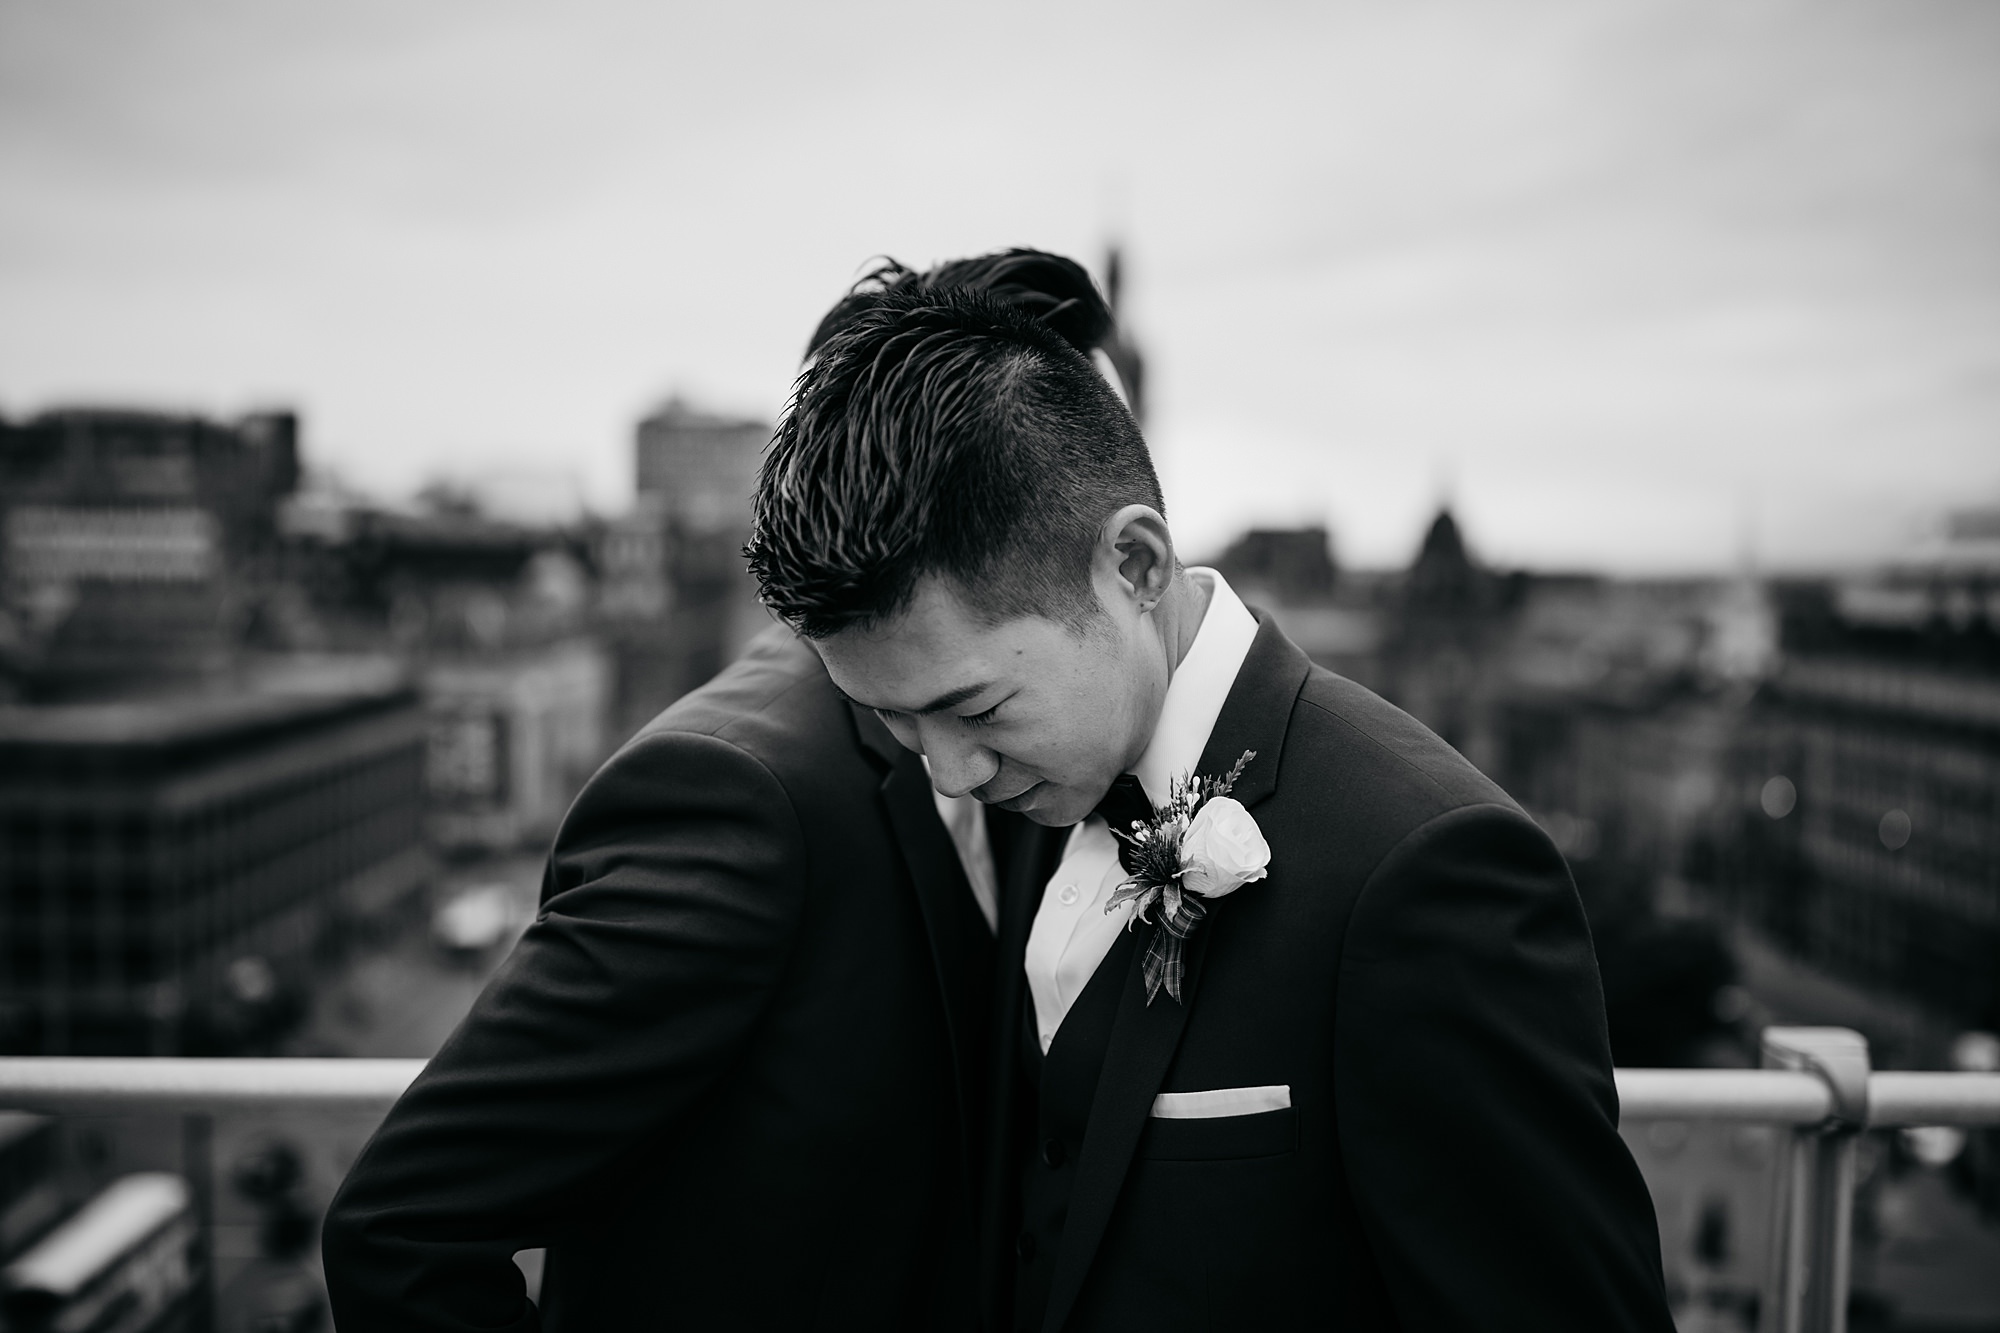 Two grooms embrace on a rooftop overlooking the city during their Glasgow elopement.